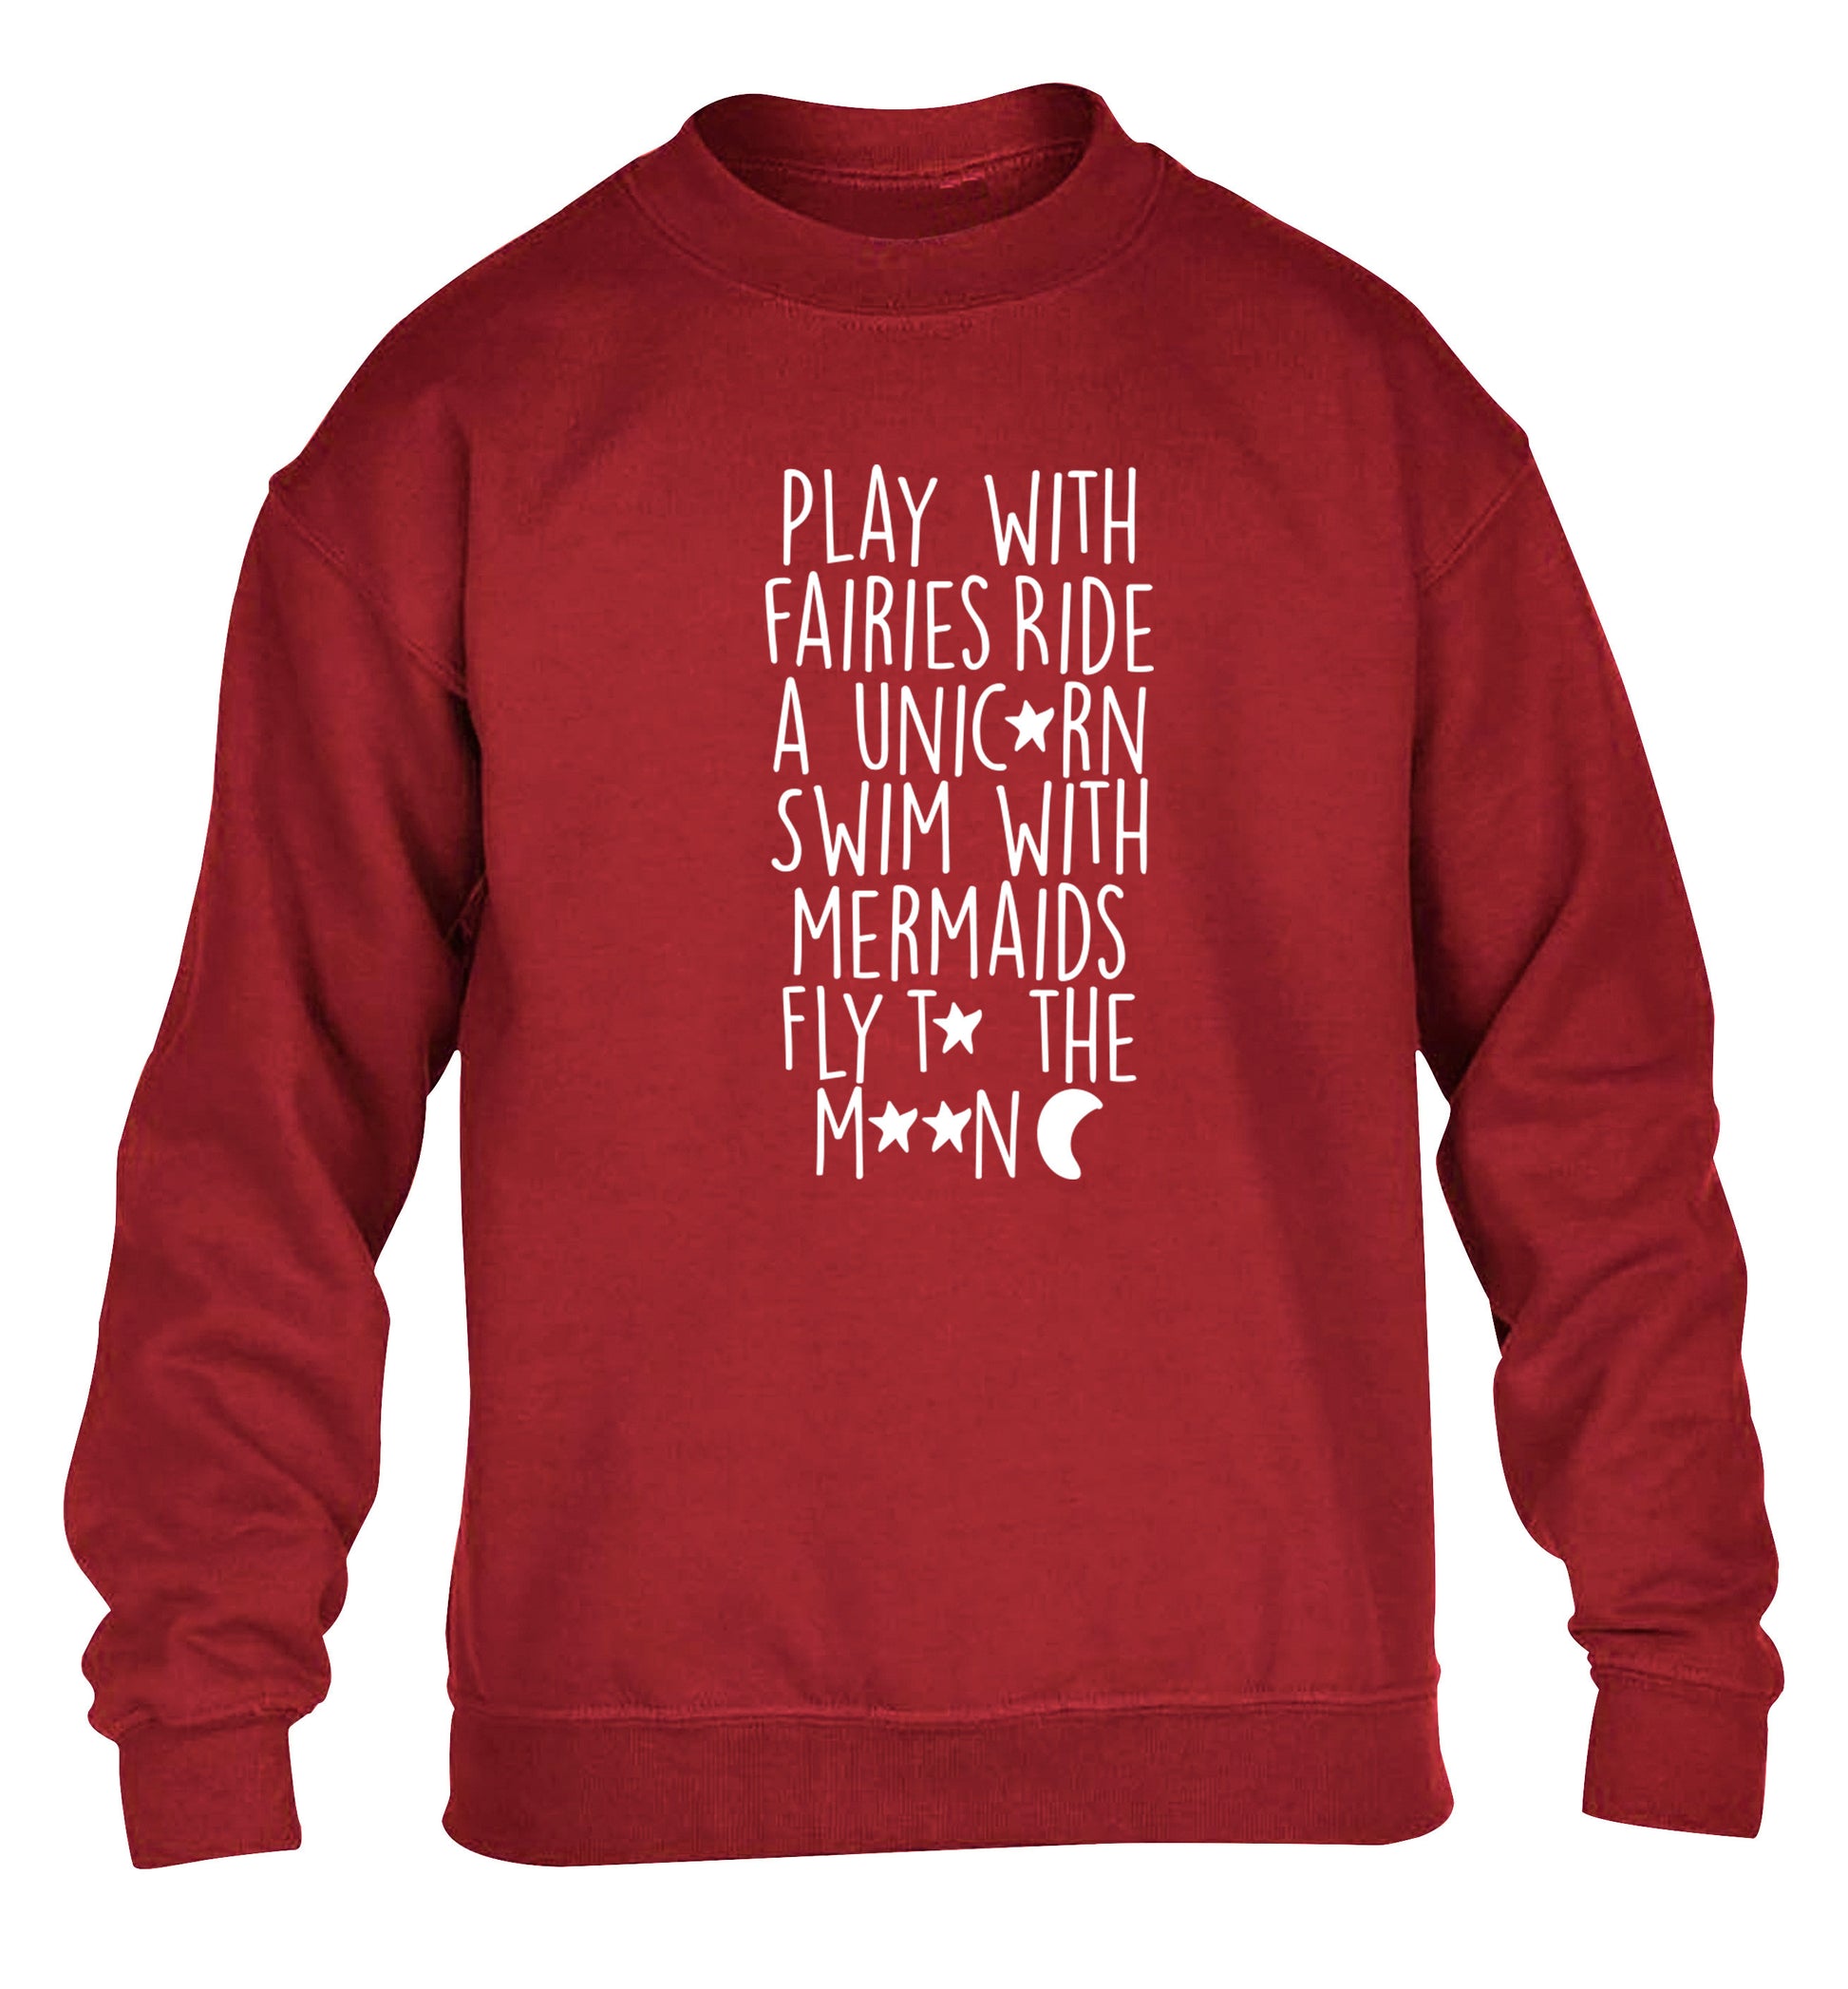 Play with fairies ride a unicorn swim with mermaids fly to the moon children's grey sweater 12-14 Years